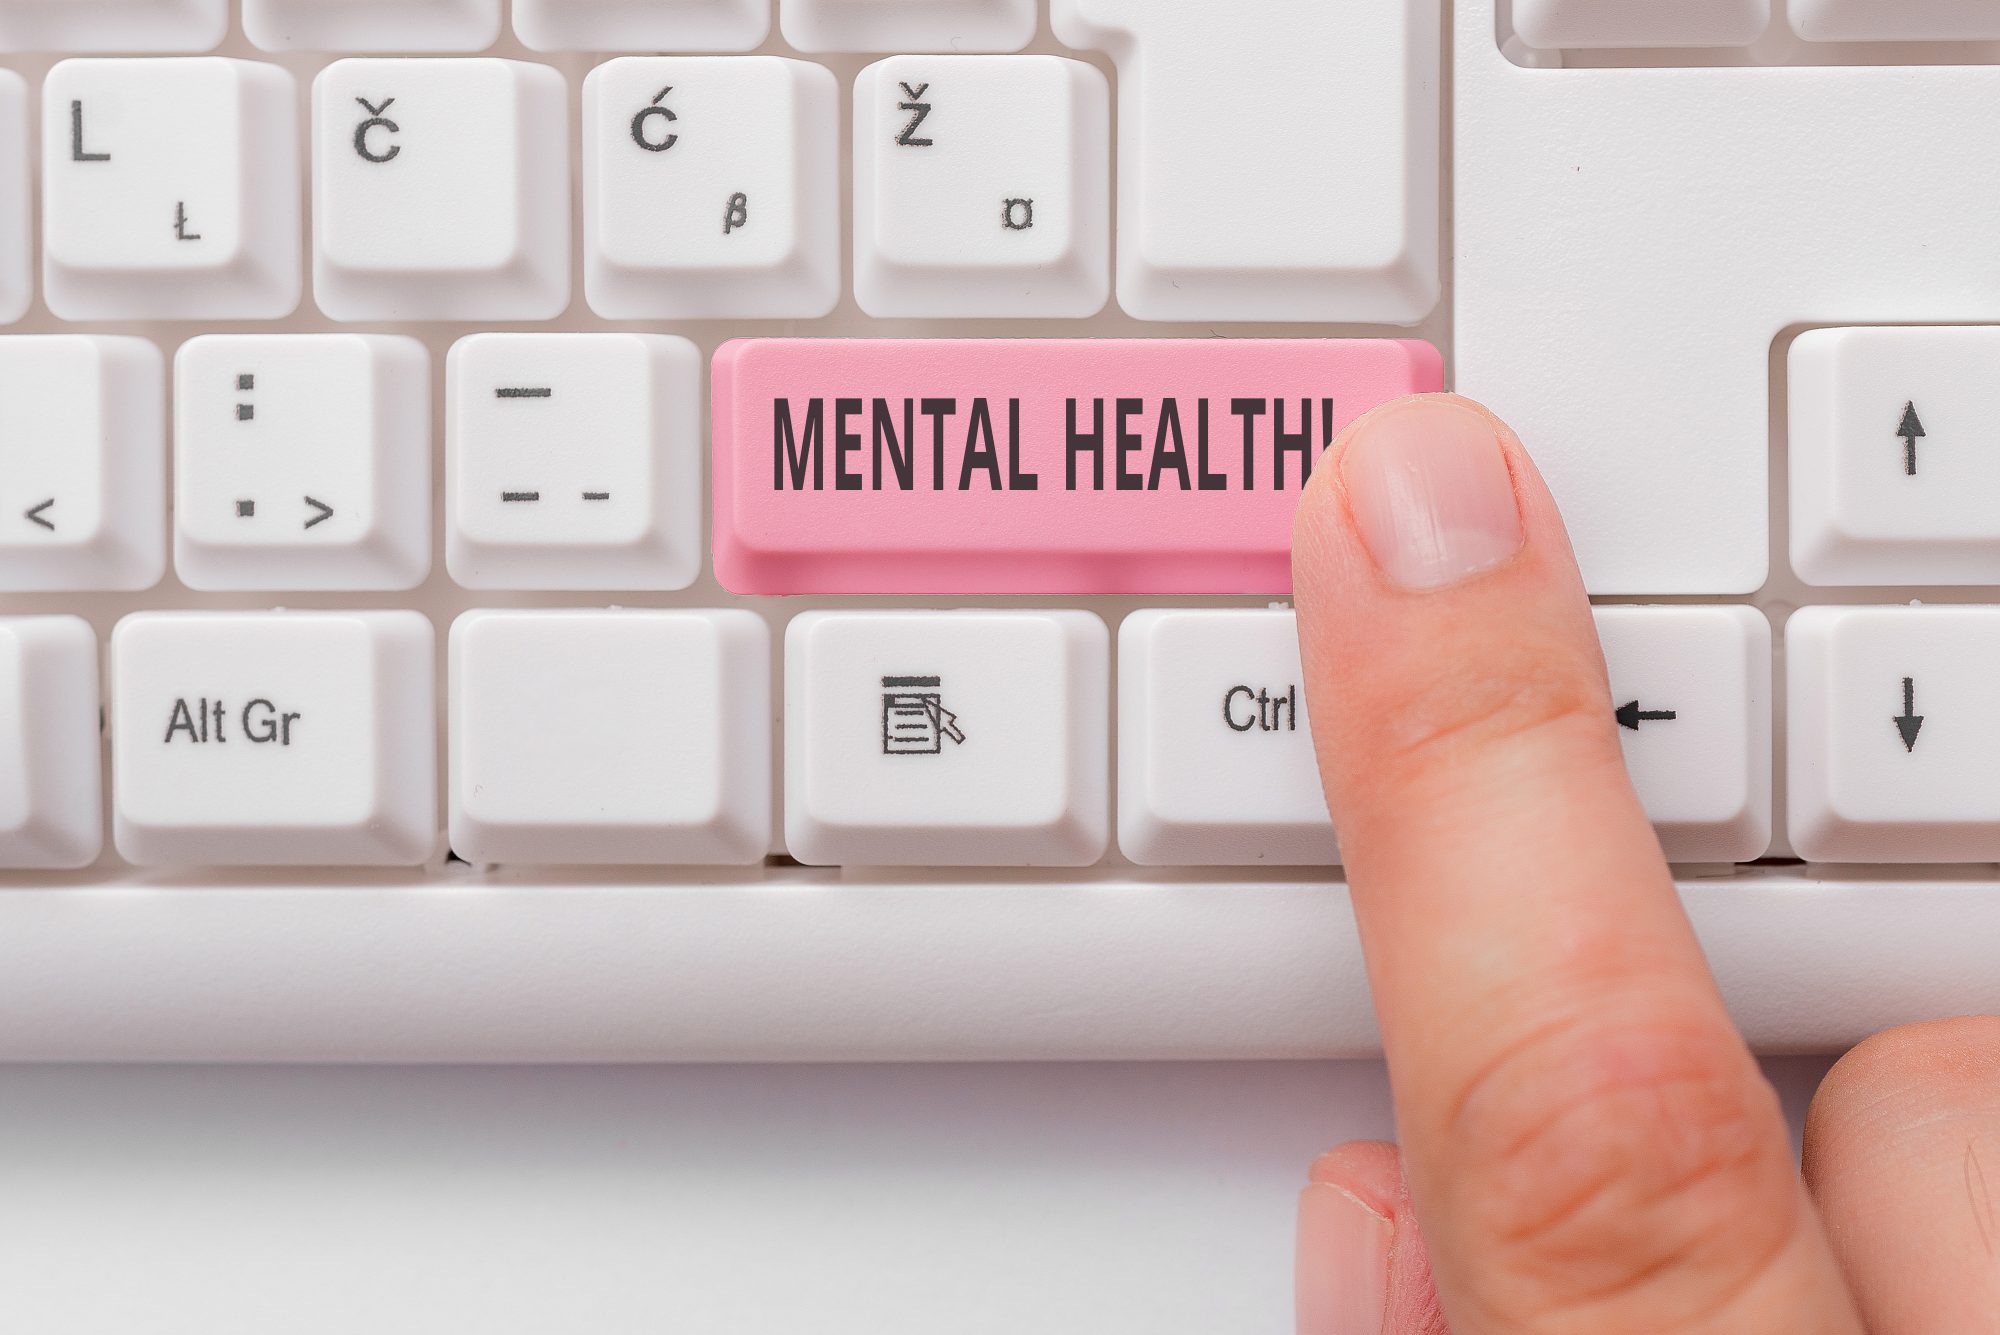 White computer keyboard with person's finger pointing to pink 'MENTAL HEALTH' button